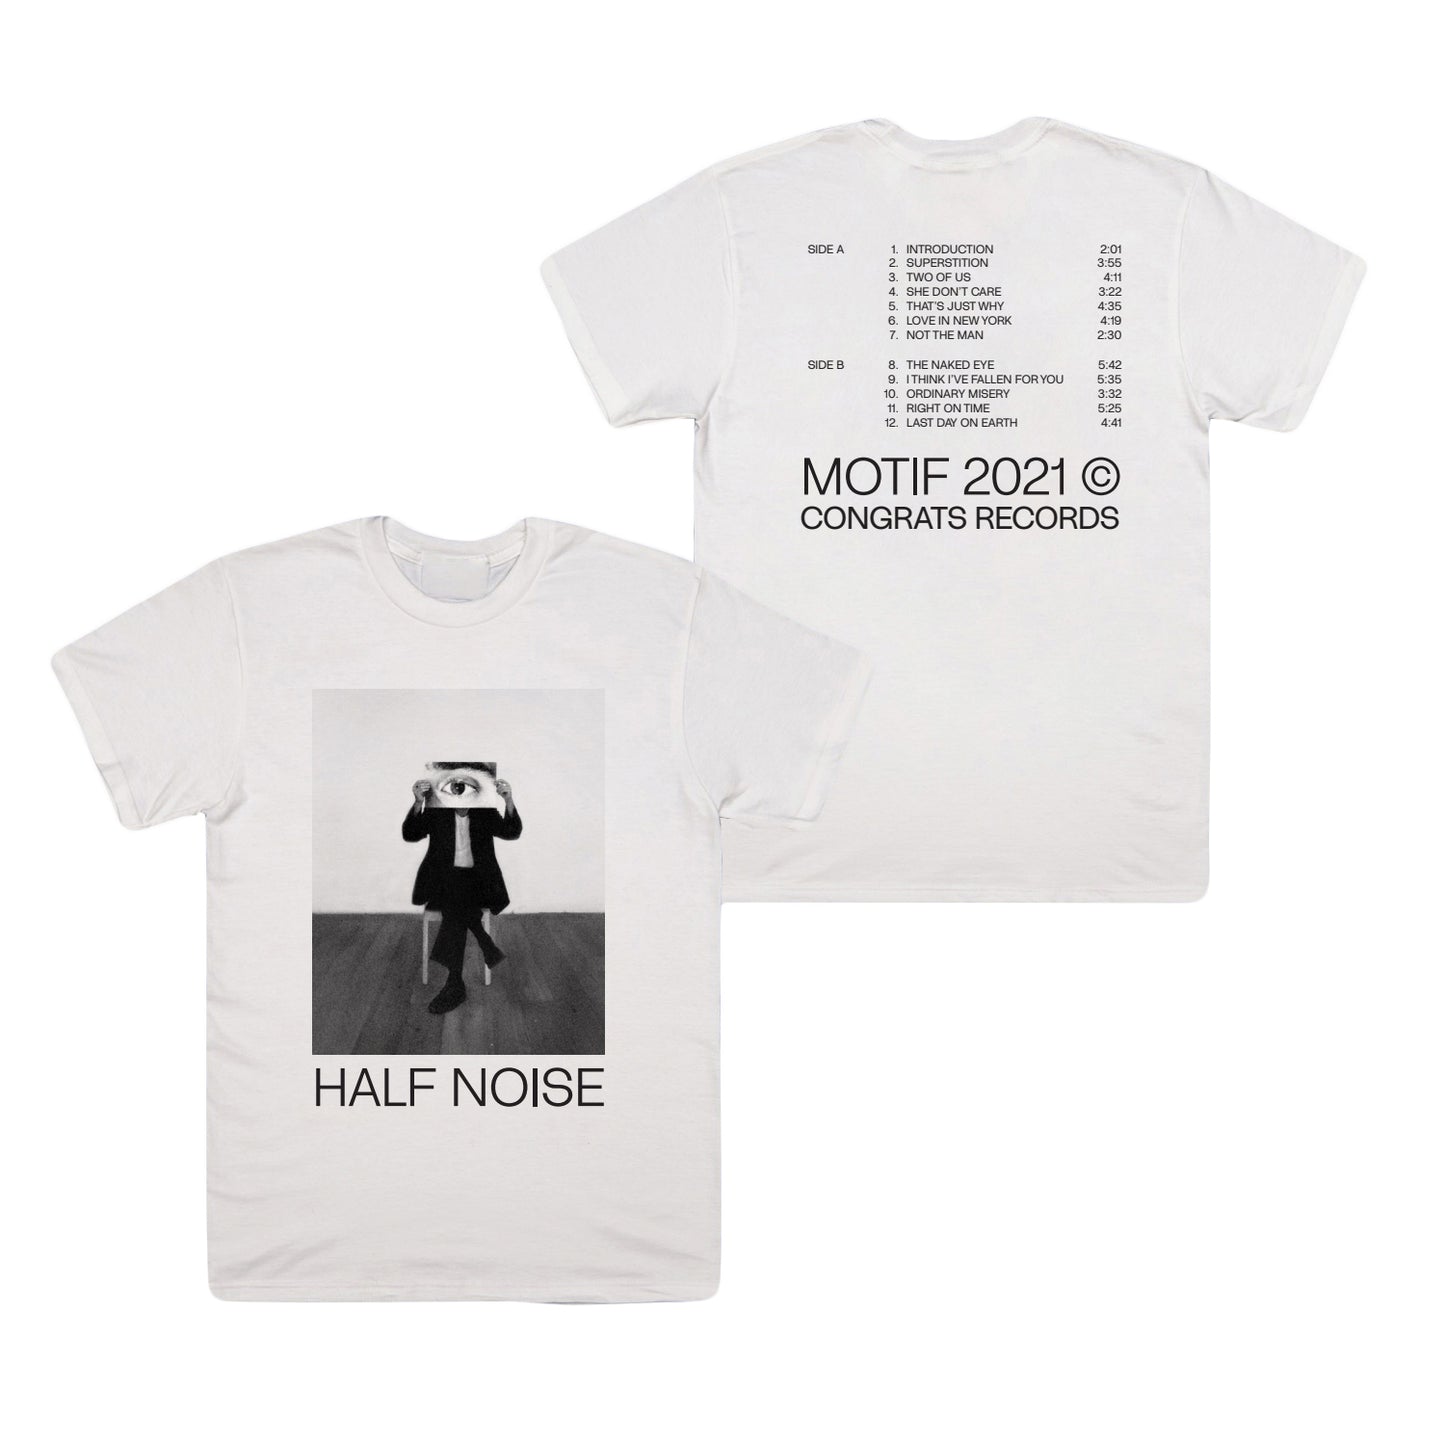 image of the front and back of a white tee shirt on a white background. front is on the left and has a black and white image of a person sitting cross legged in a chair with a big photo of an eye over their face. the bottom says half noise. the back of the shirt is on the right and has the tracklist to the Motif album released in 2021 on congrats records